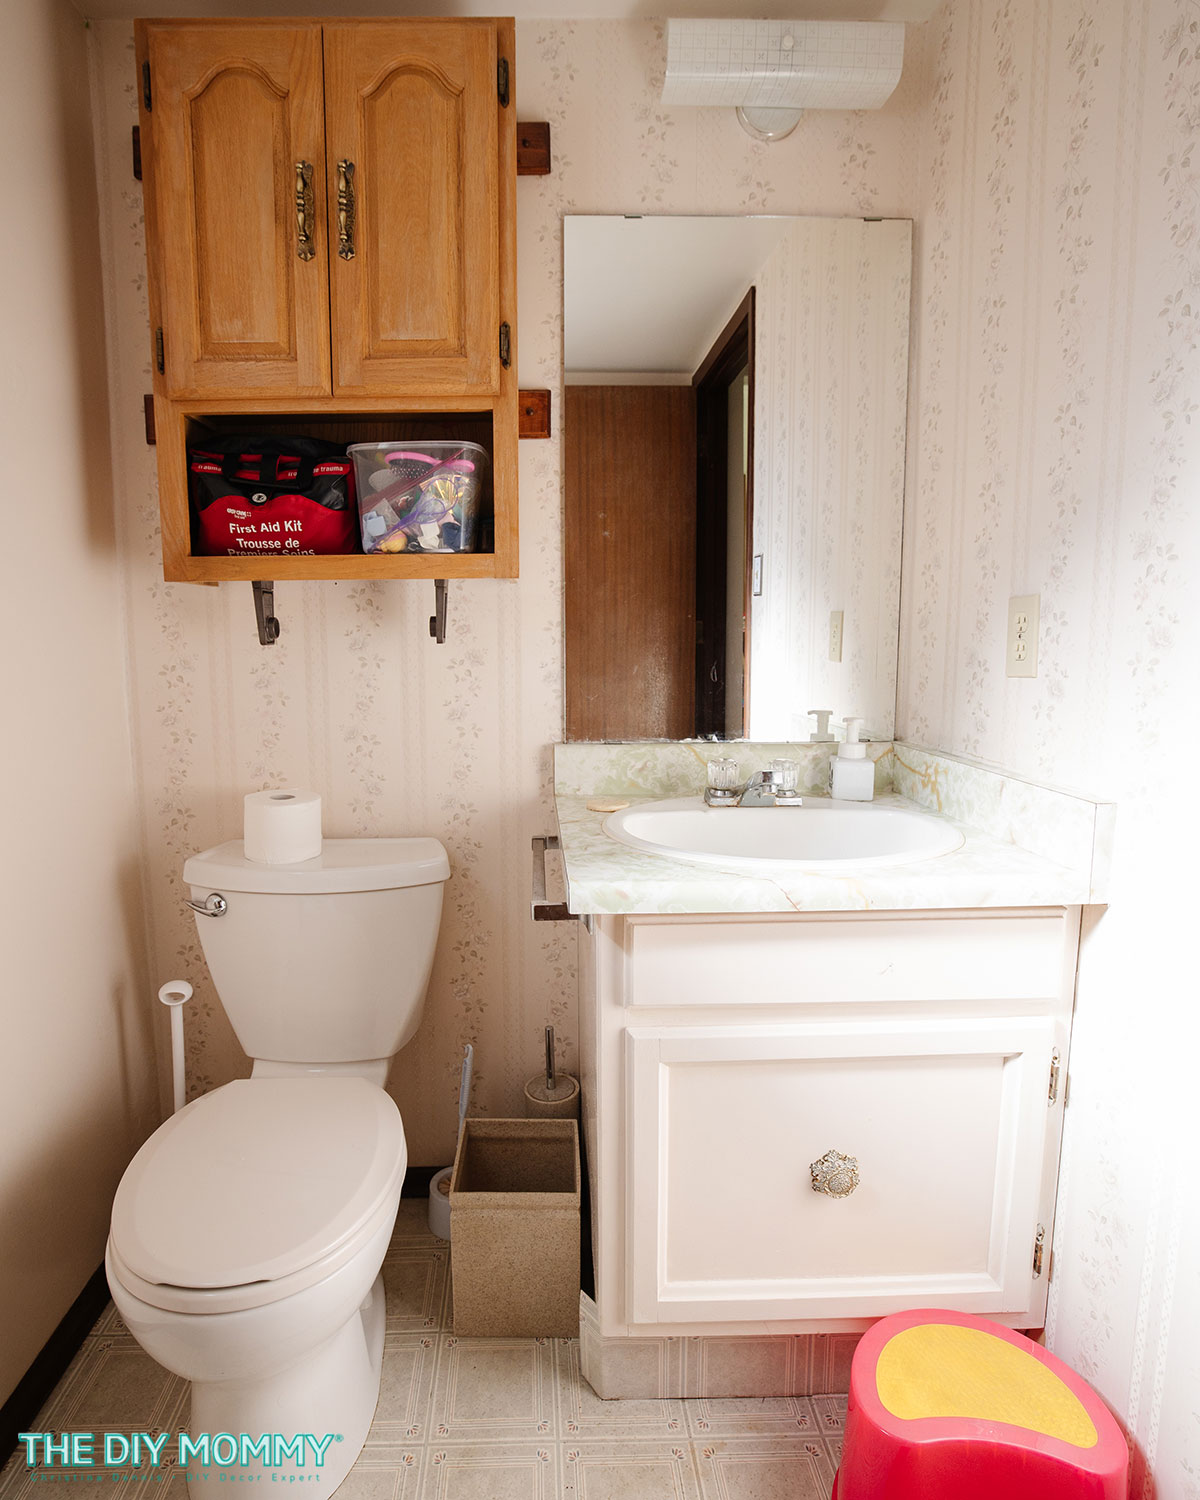 https://thediymommy.com/wp-content/uploads/2023/07/Adorable-Small-Bathroom-Remodel-on-a-Budget-28.jpg